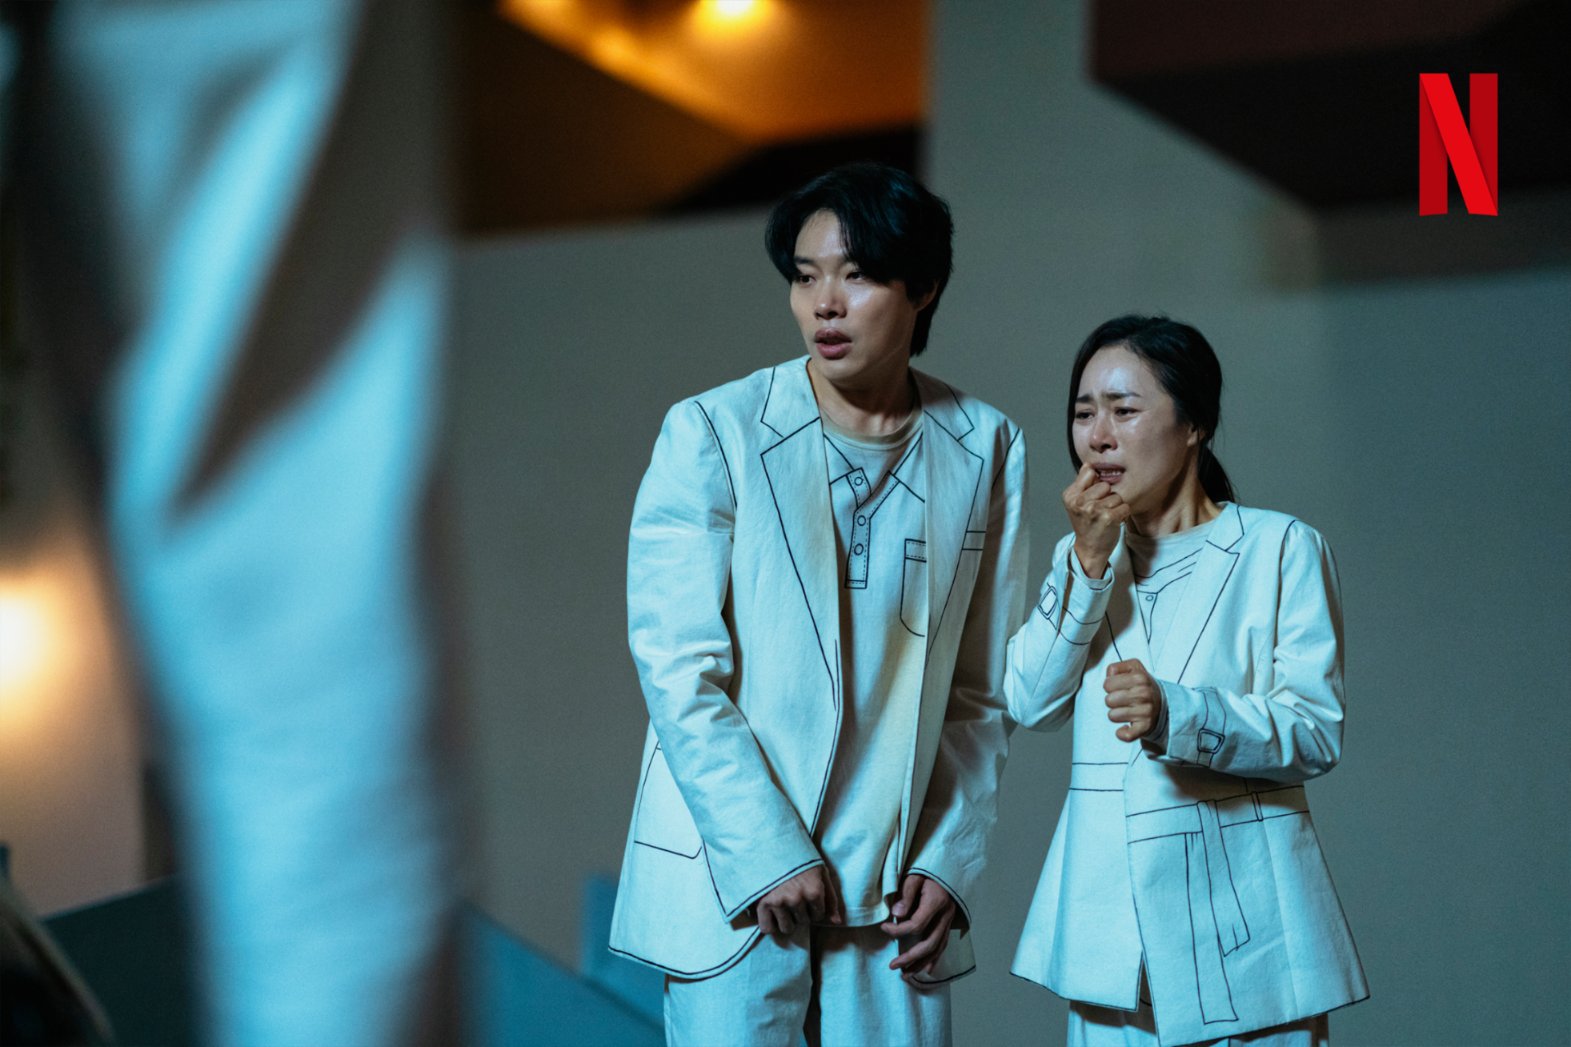 Ryu Jun Yeol, Chun Woo Hee, Park Jung Min, And More Are Trapped In A Mysterious Place In New Thriller Drama 